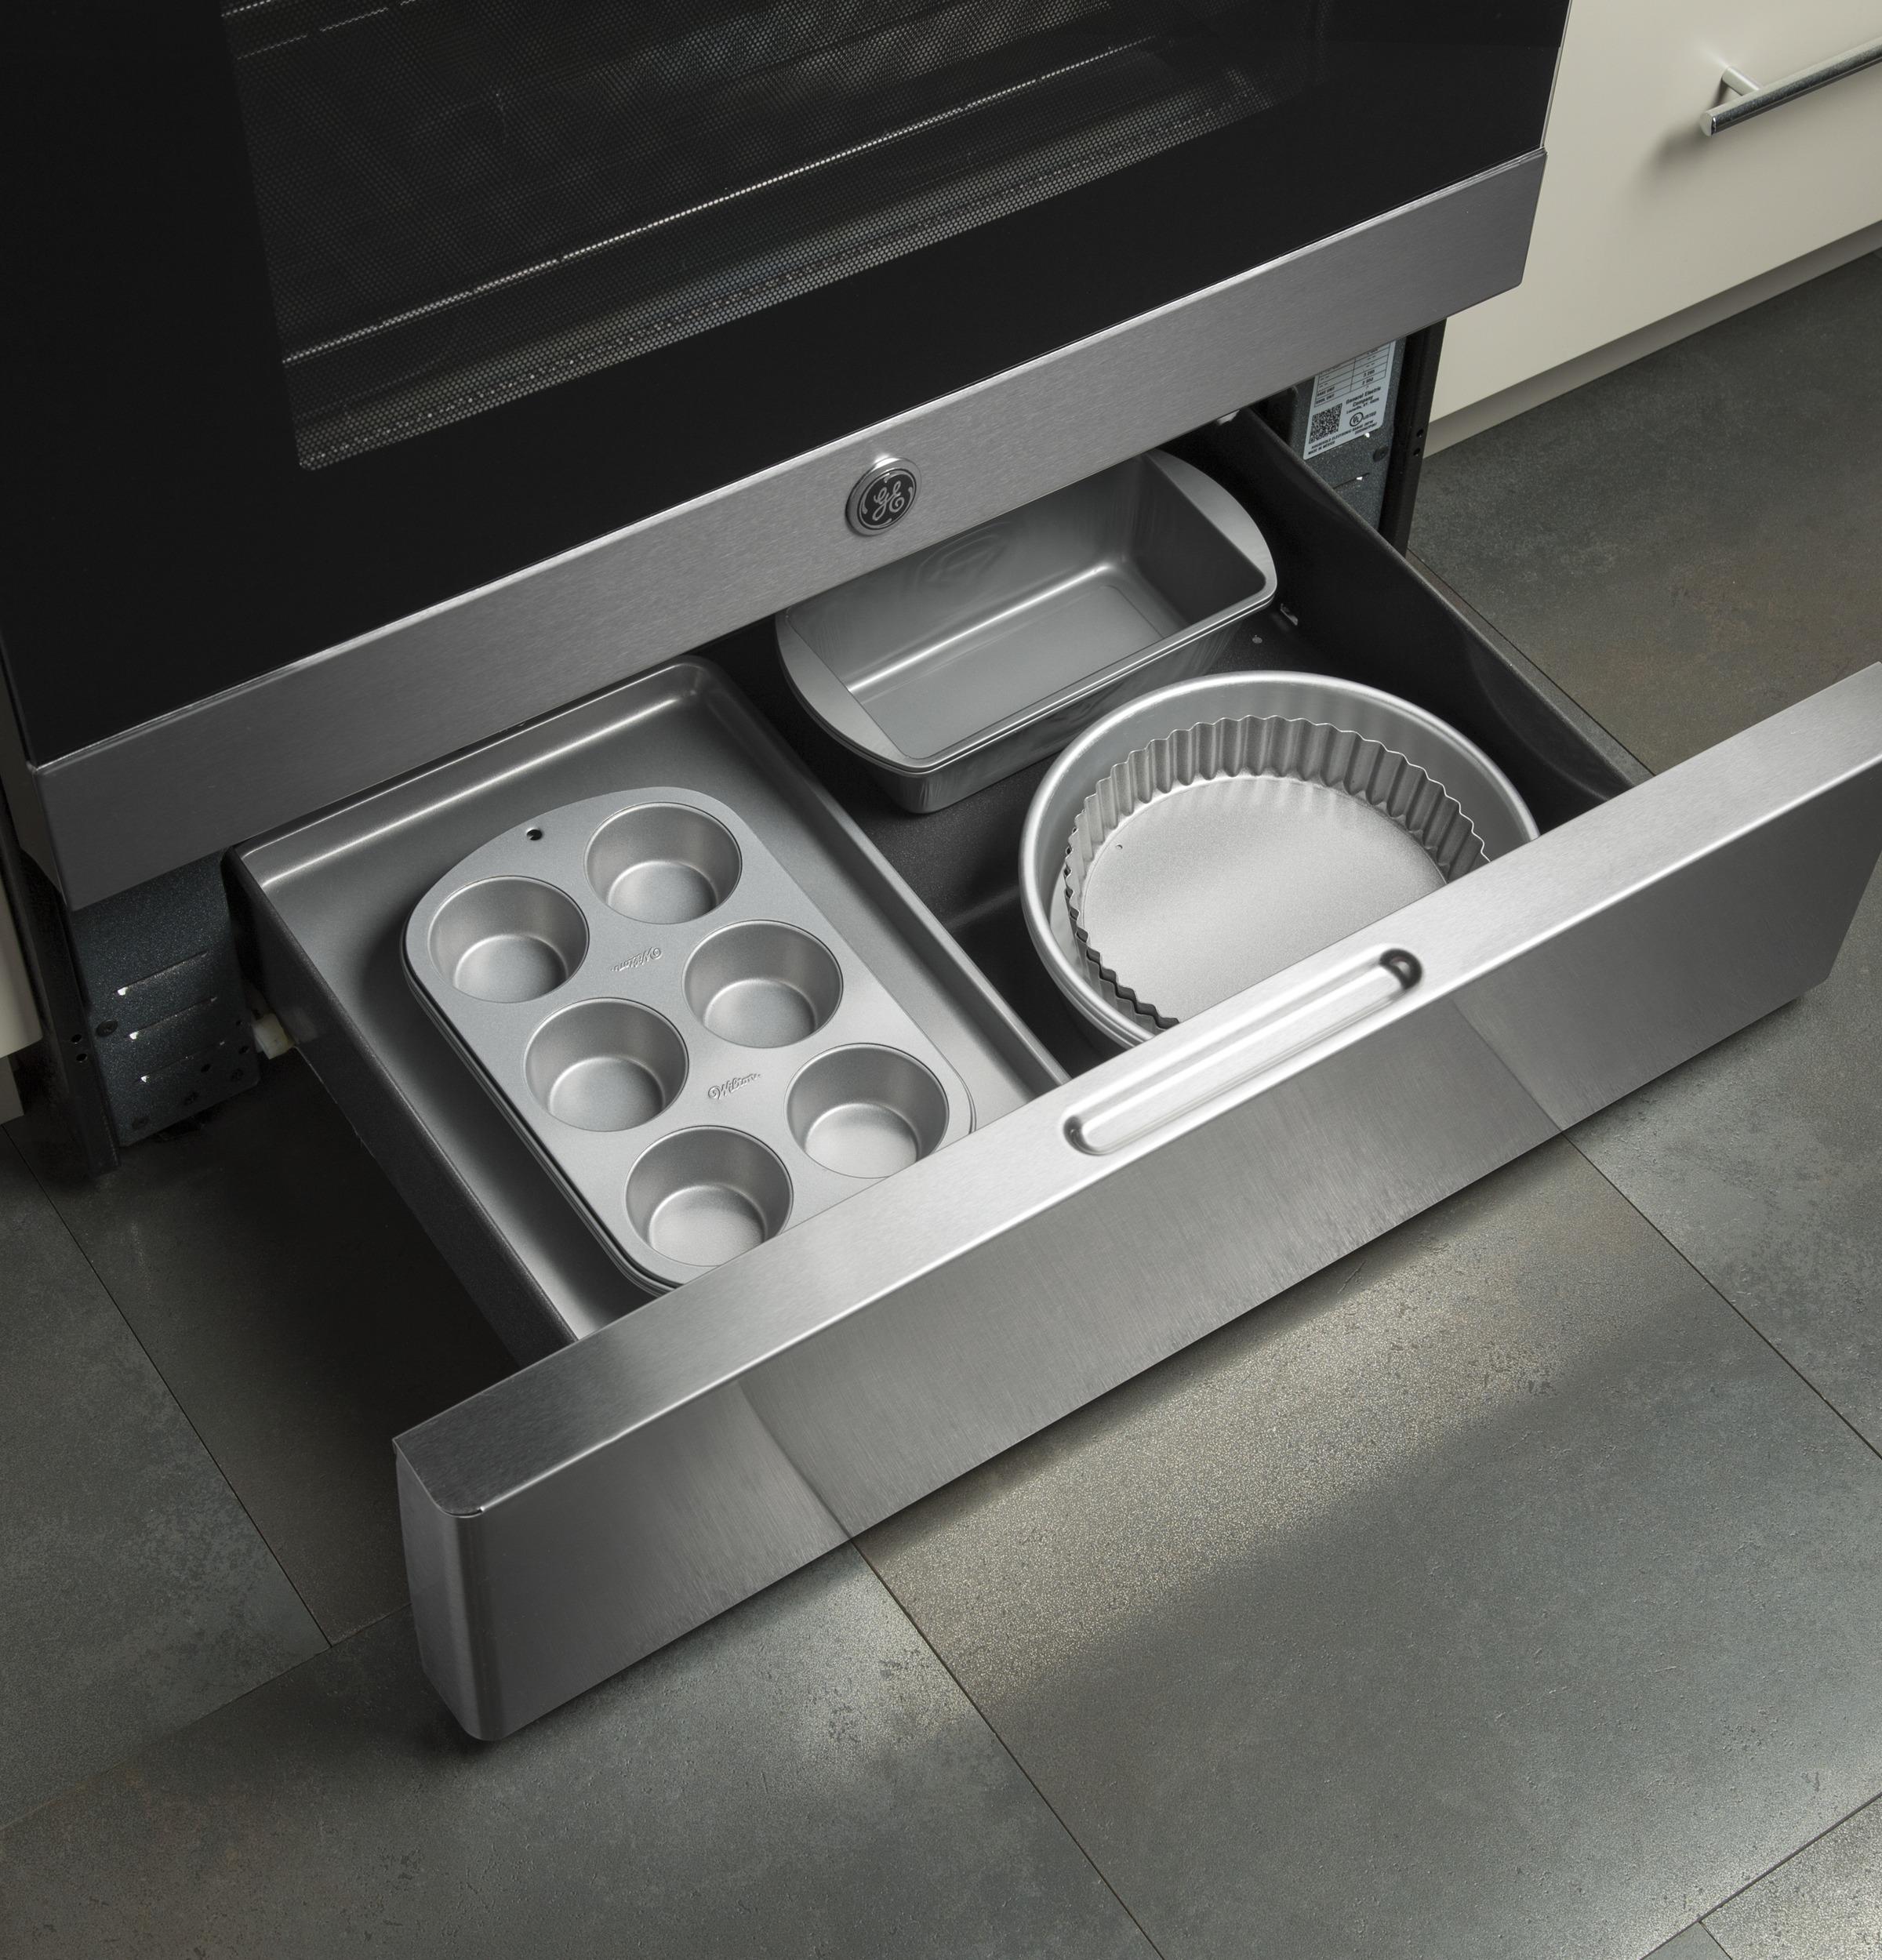 GE 30" Free-standing Electric Radiant Smooth Cooktop Range